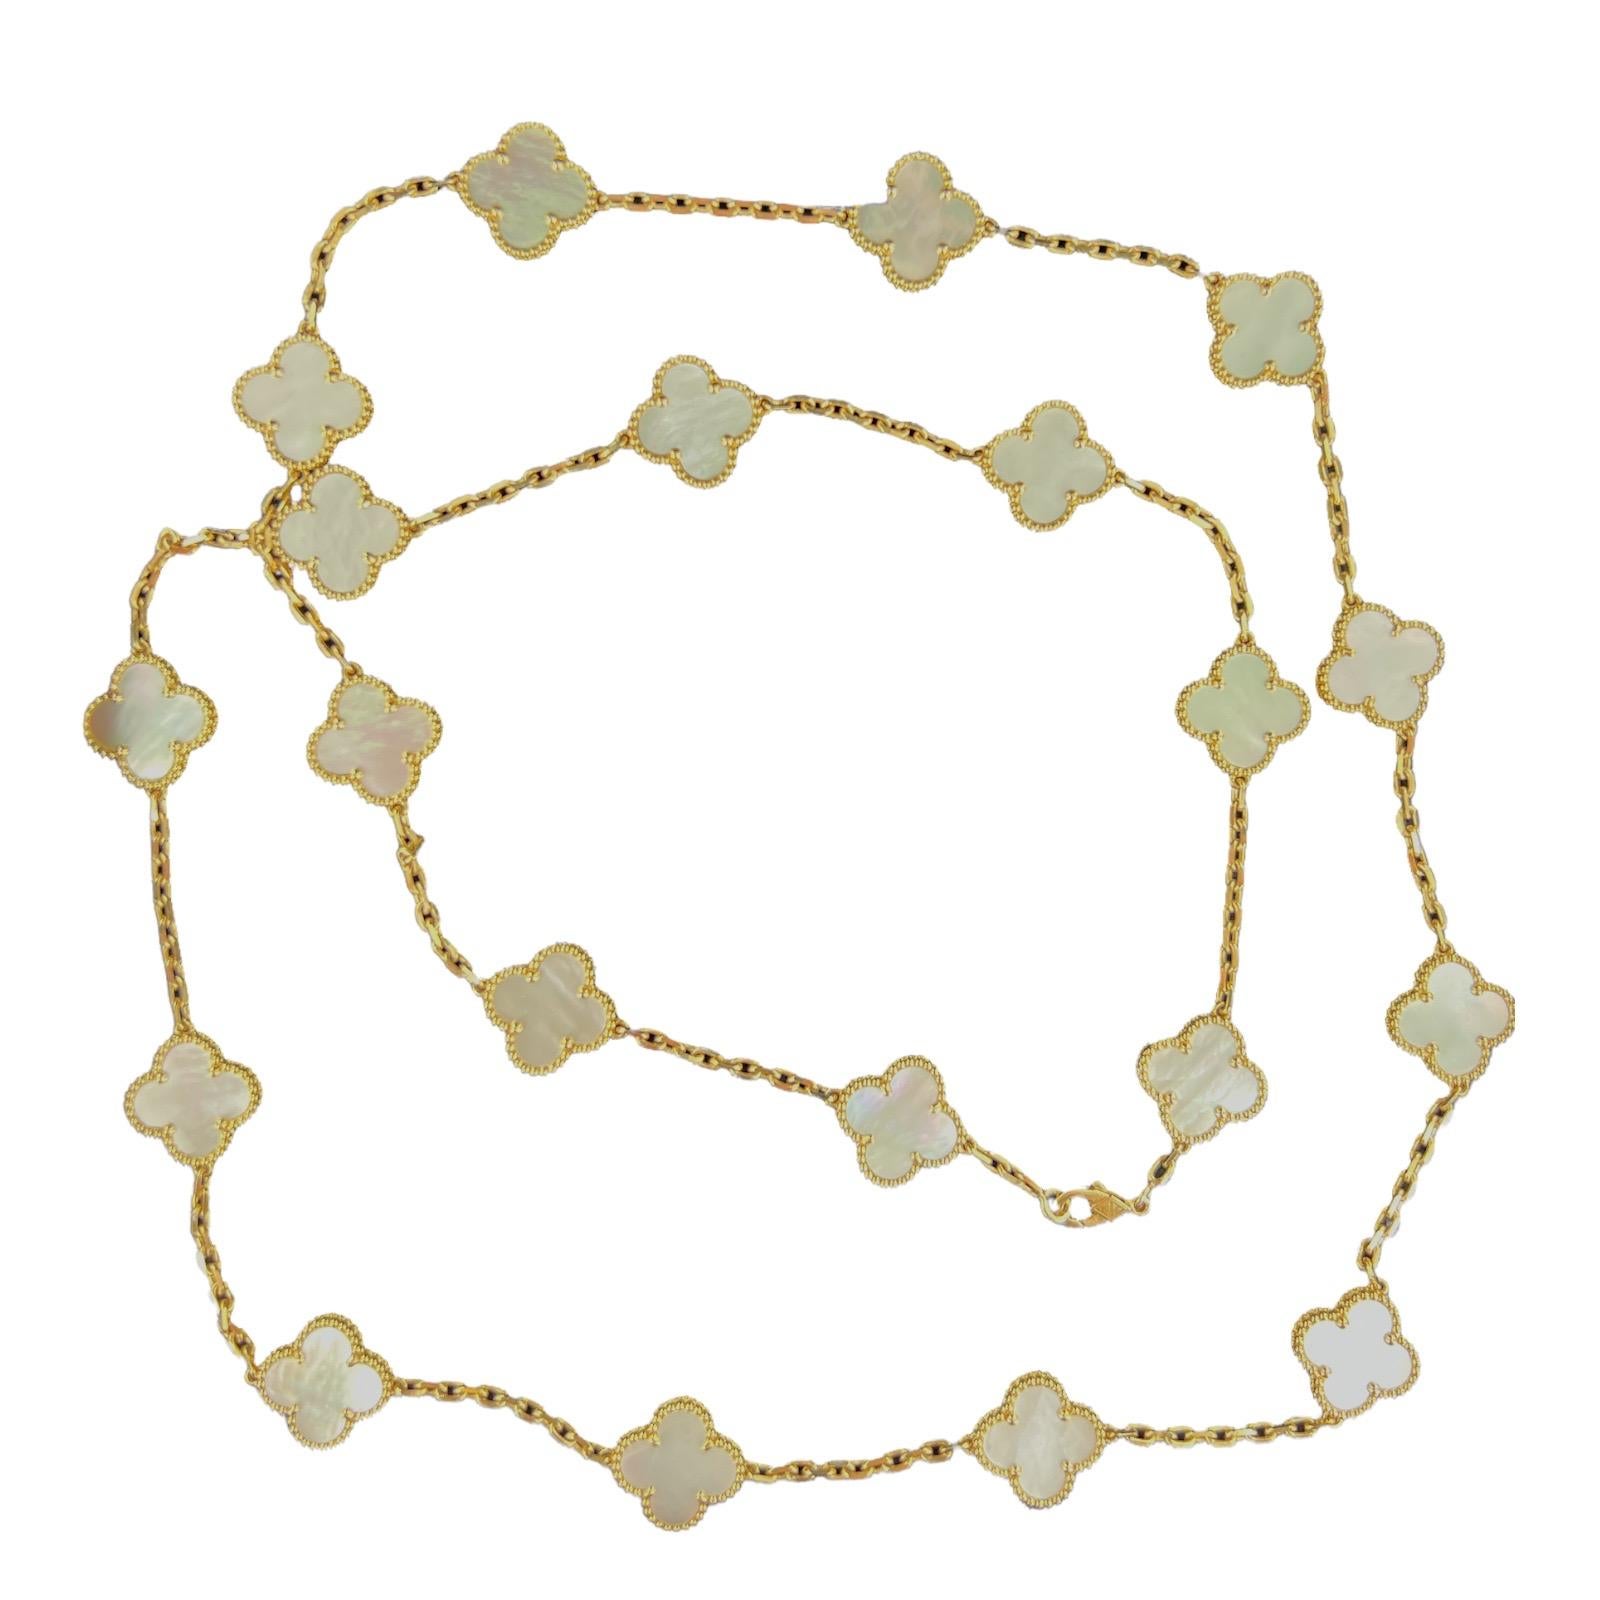 Authentic Van Cleef & Arpels Alhambra 20 motif mother of pearl necklace fashioned in 18 karat yellow gold. The necklace measures 33.5 inches in length, and the clover stations measures 15 x 15mm. The necklace is hallmarked, signed, and numbered.